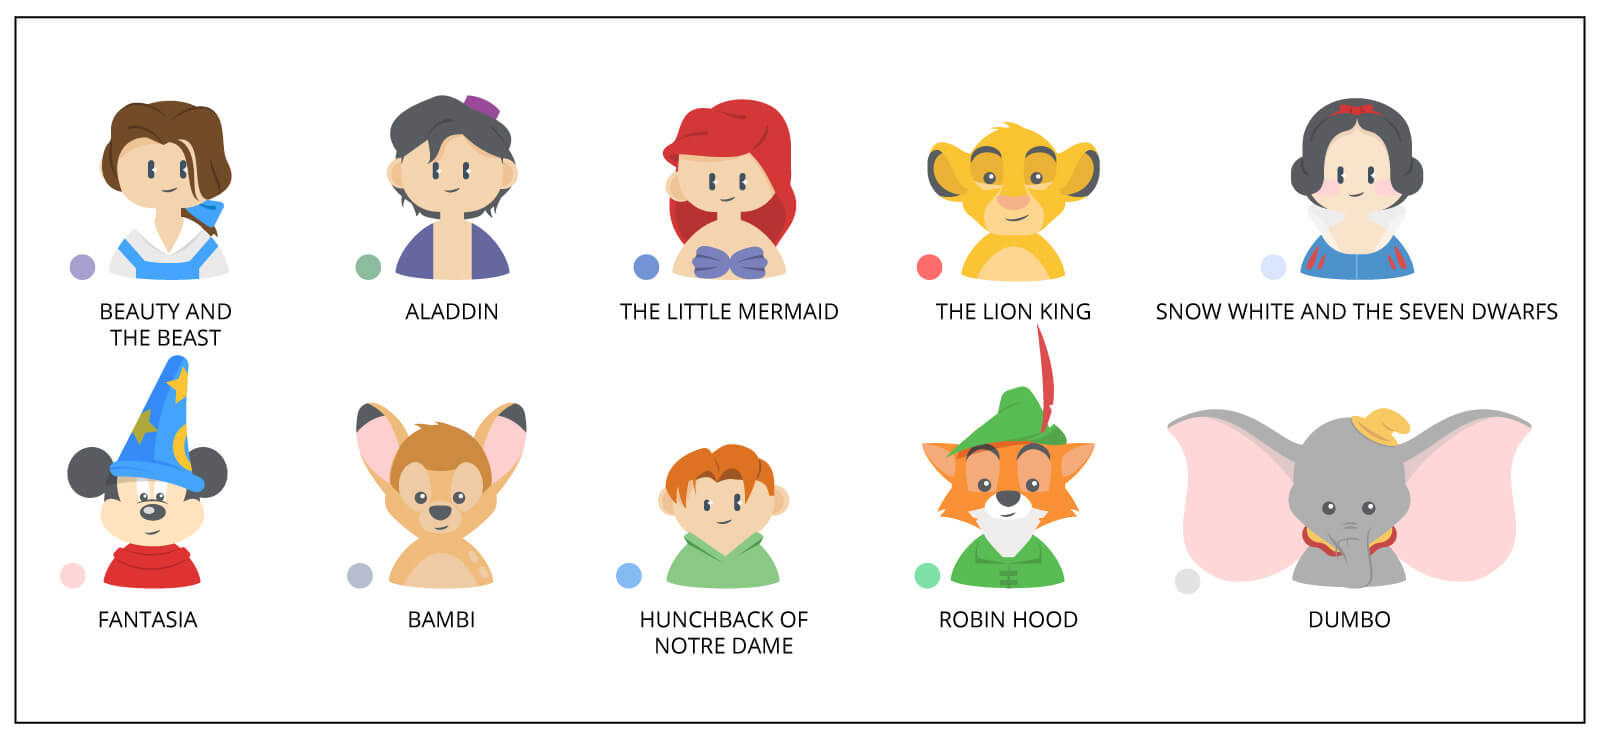 Legend of Favorite Disney Characters by Canadian territories